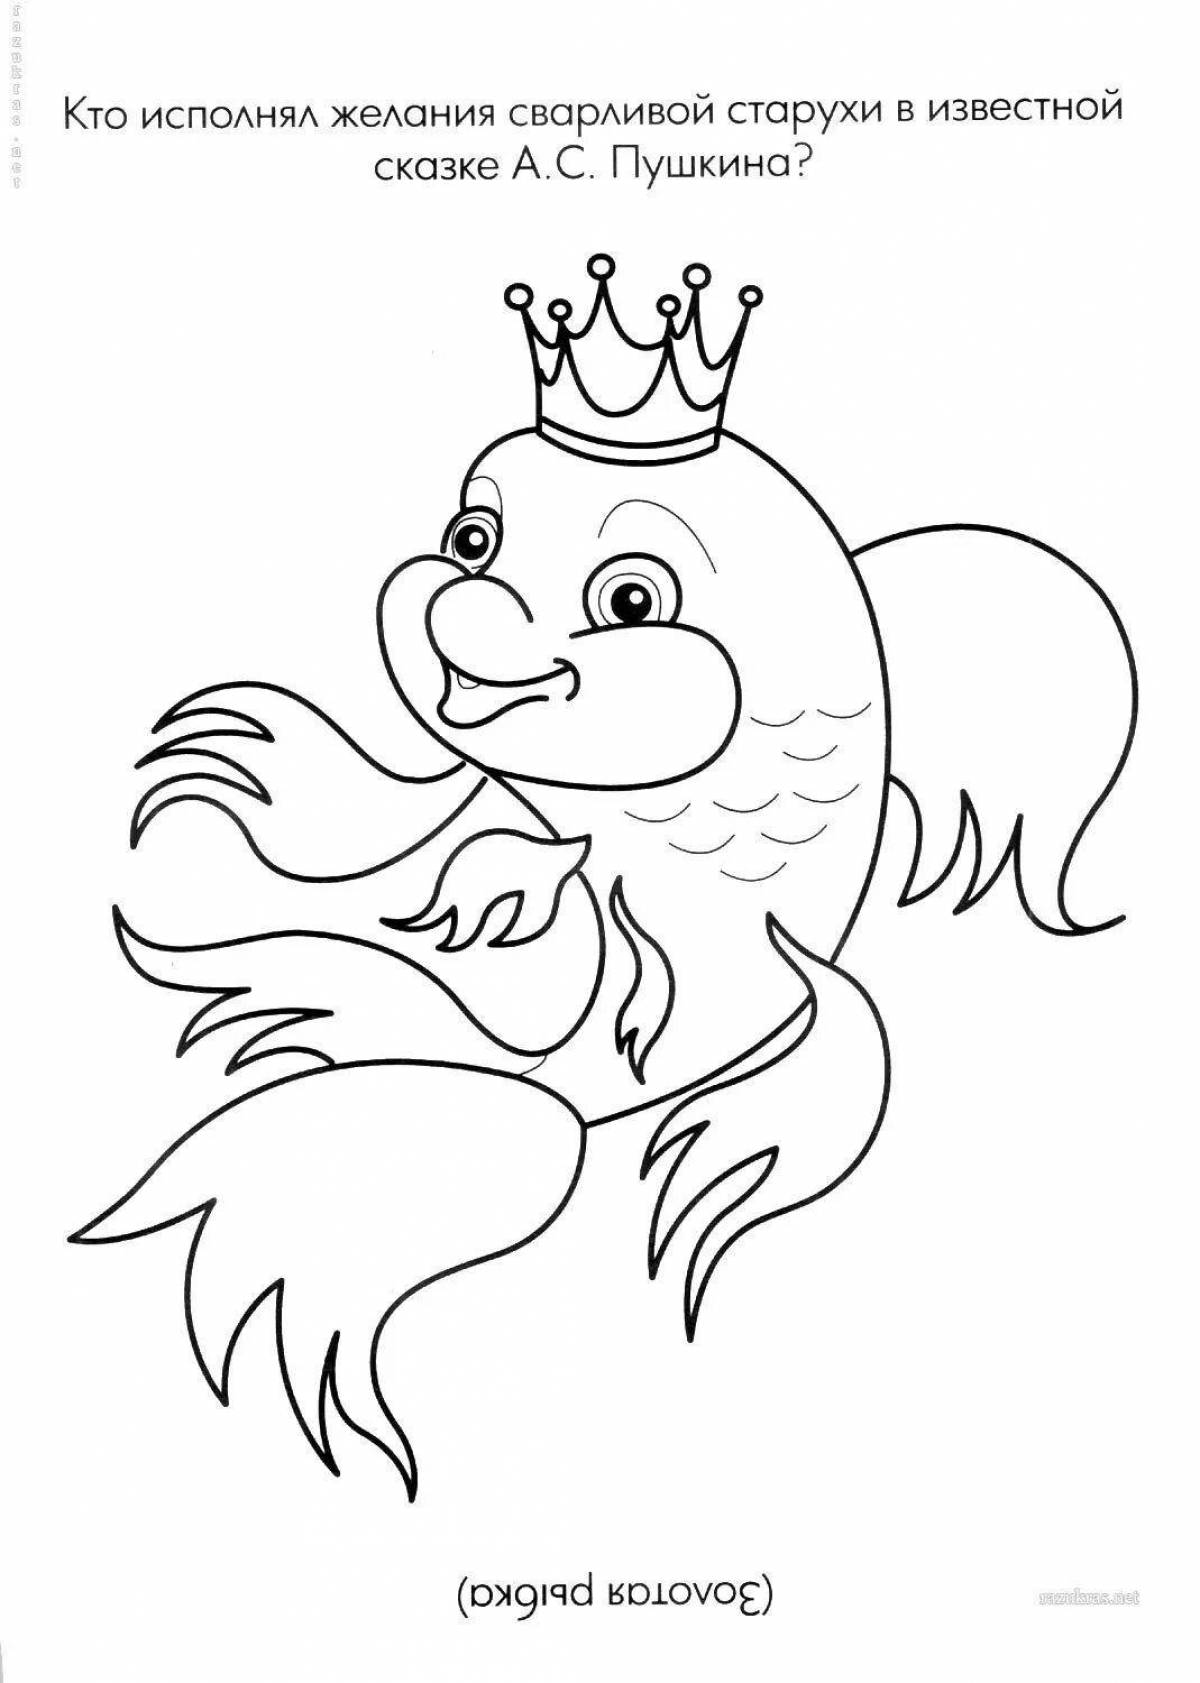 Adorable fairy tale coloring pages